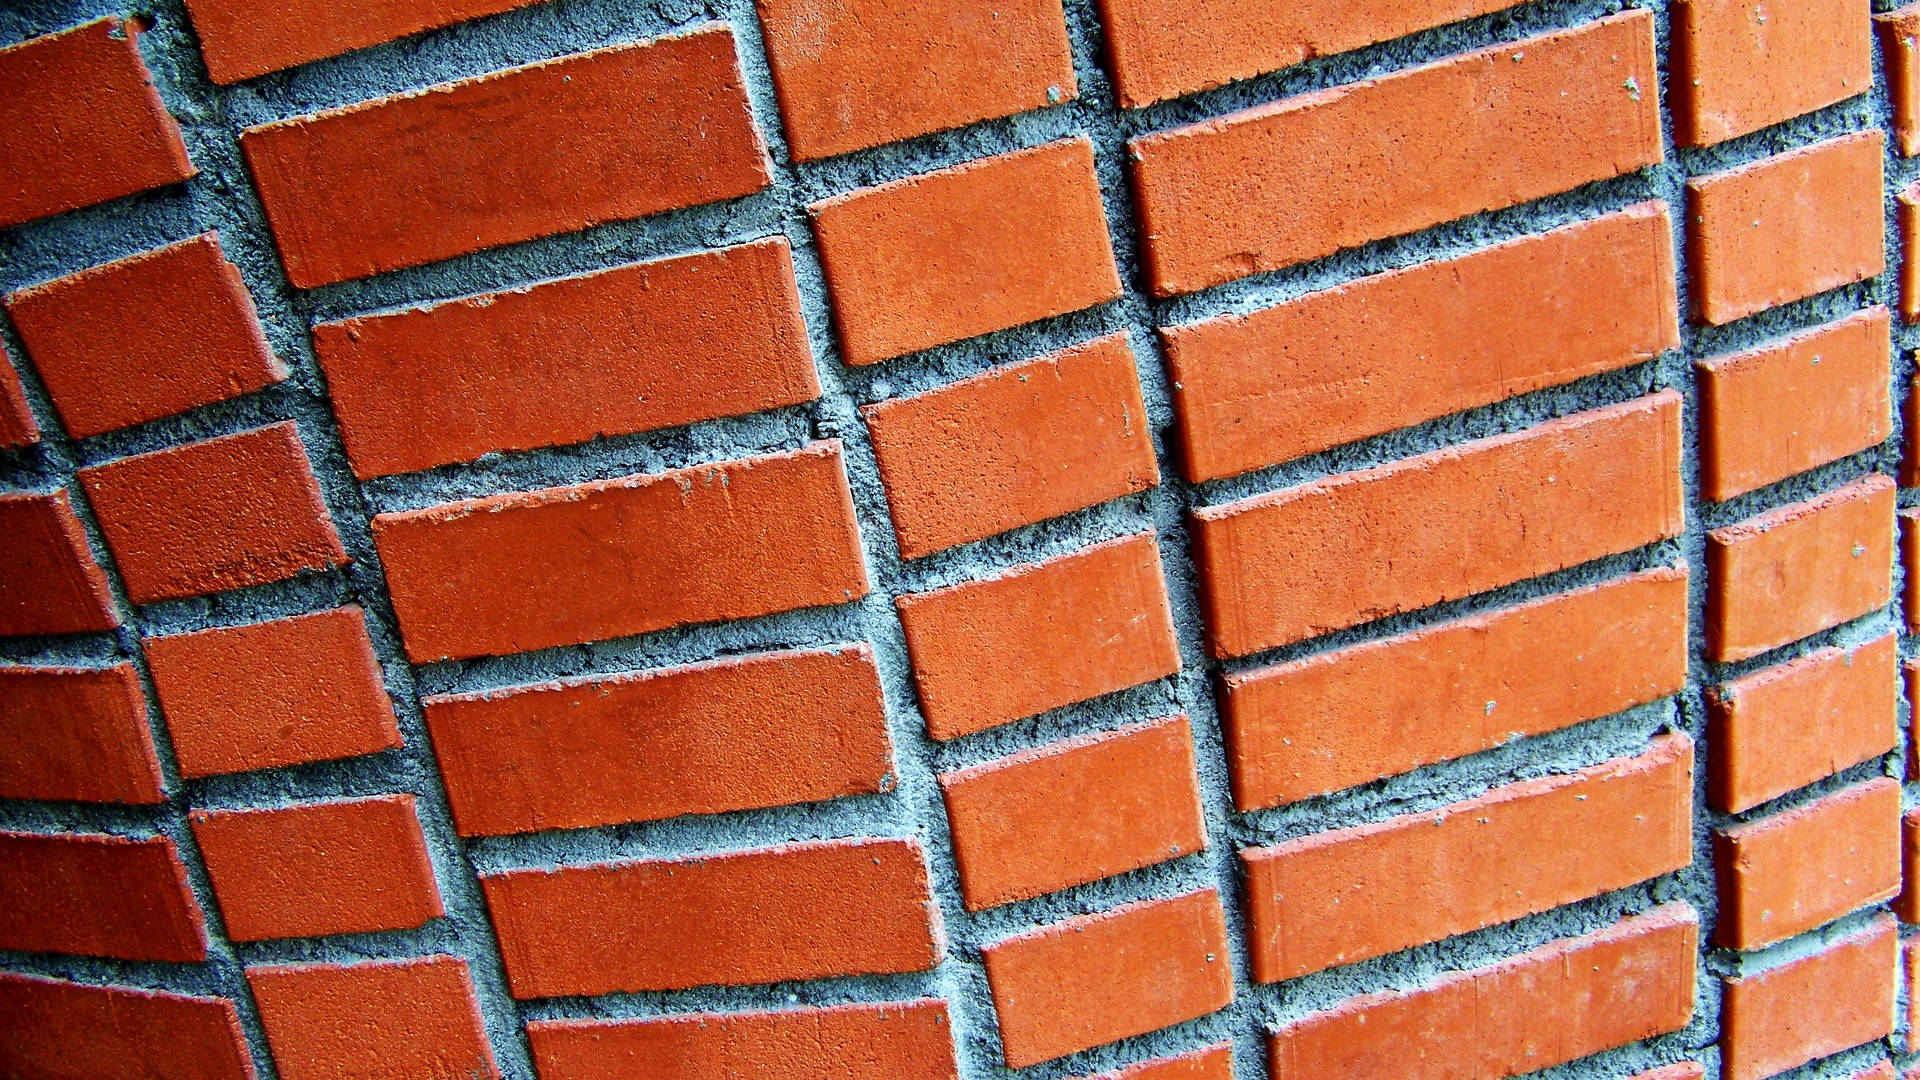 3300X1856 Brick Wallpaper and Background